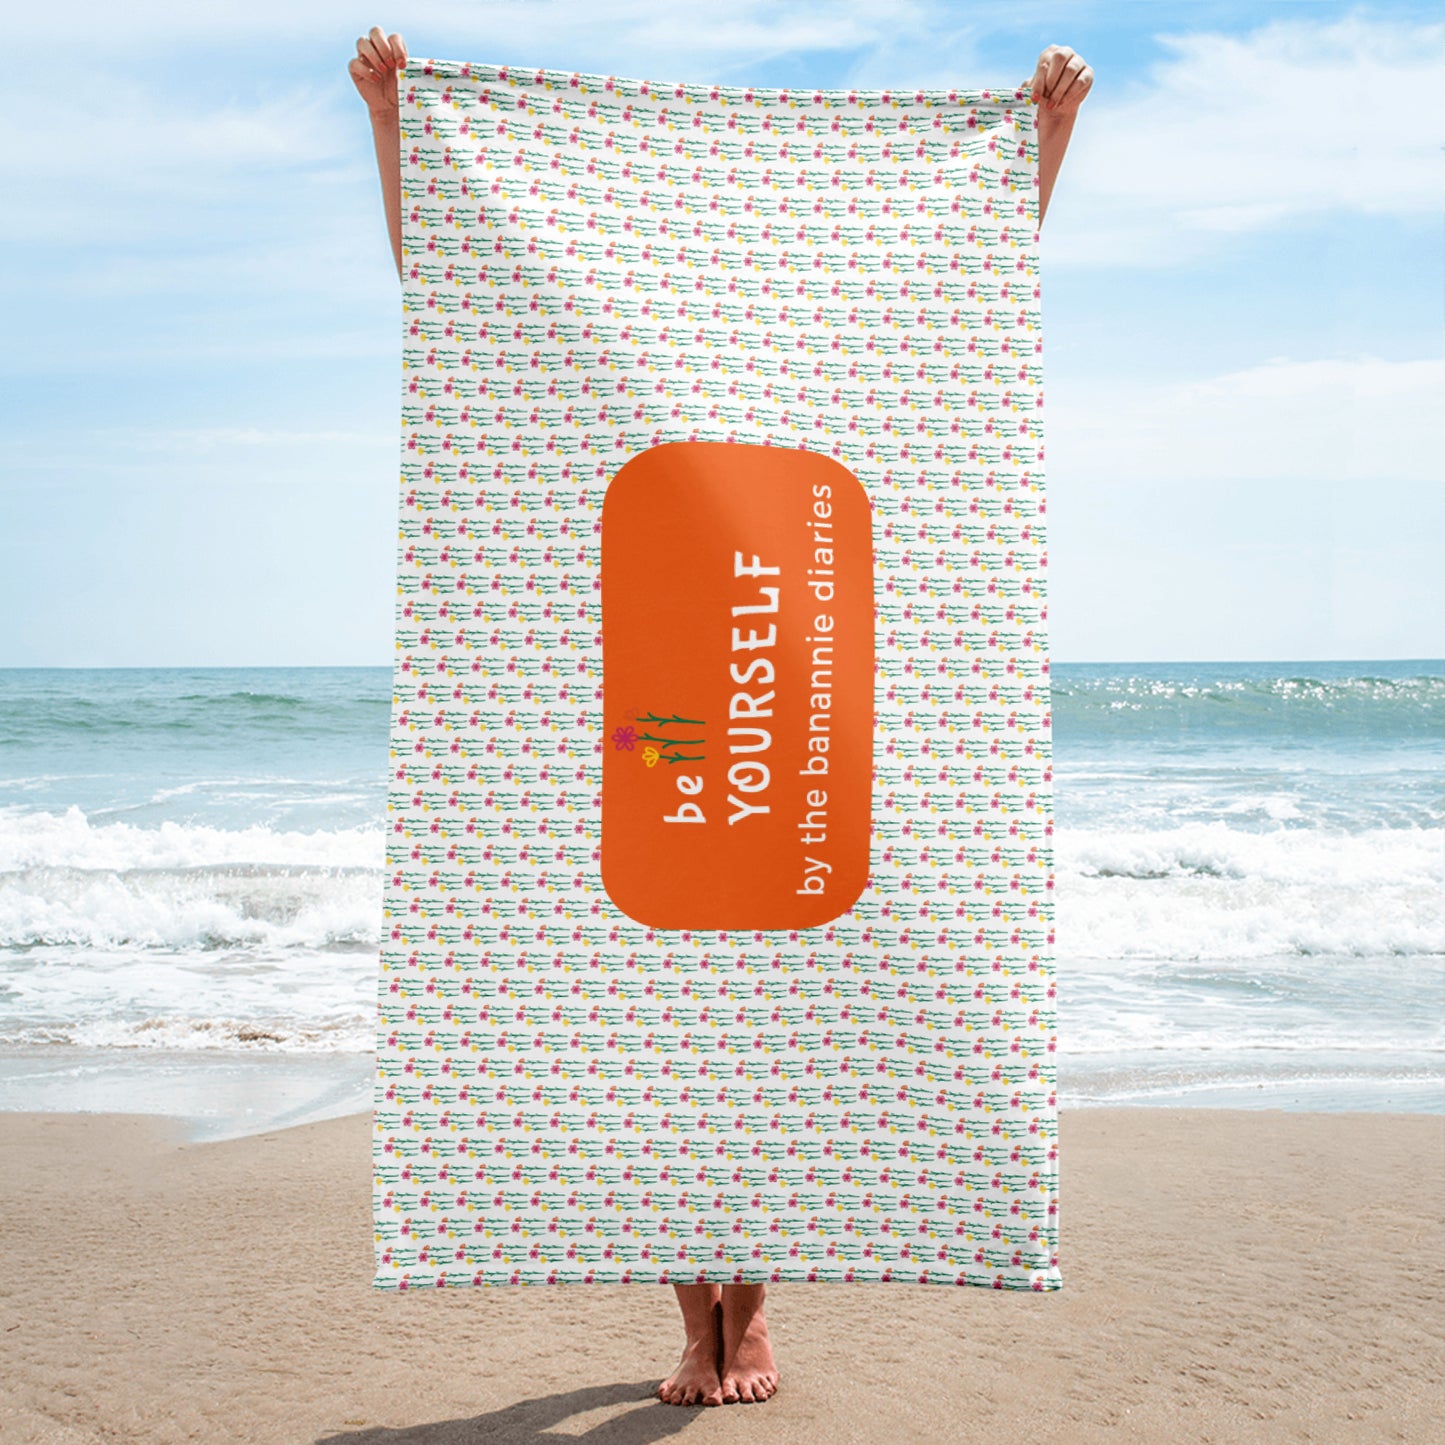 be yourself - towel by the banannie diaries